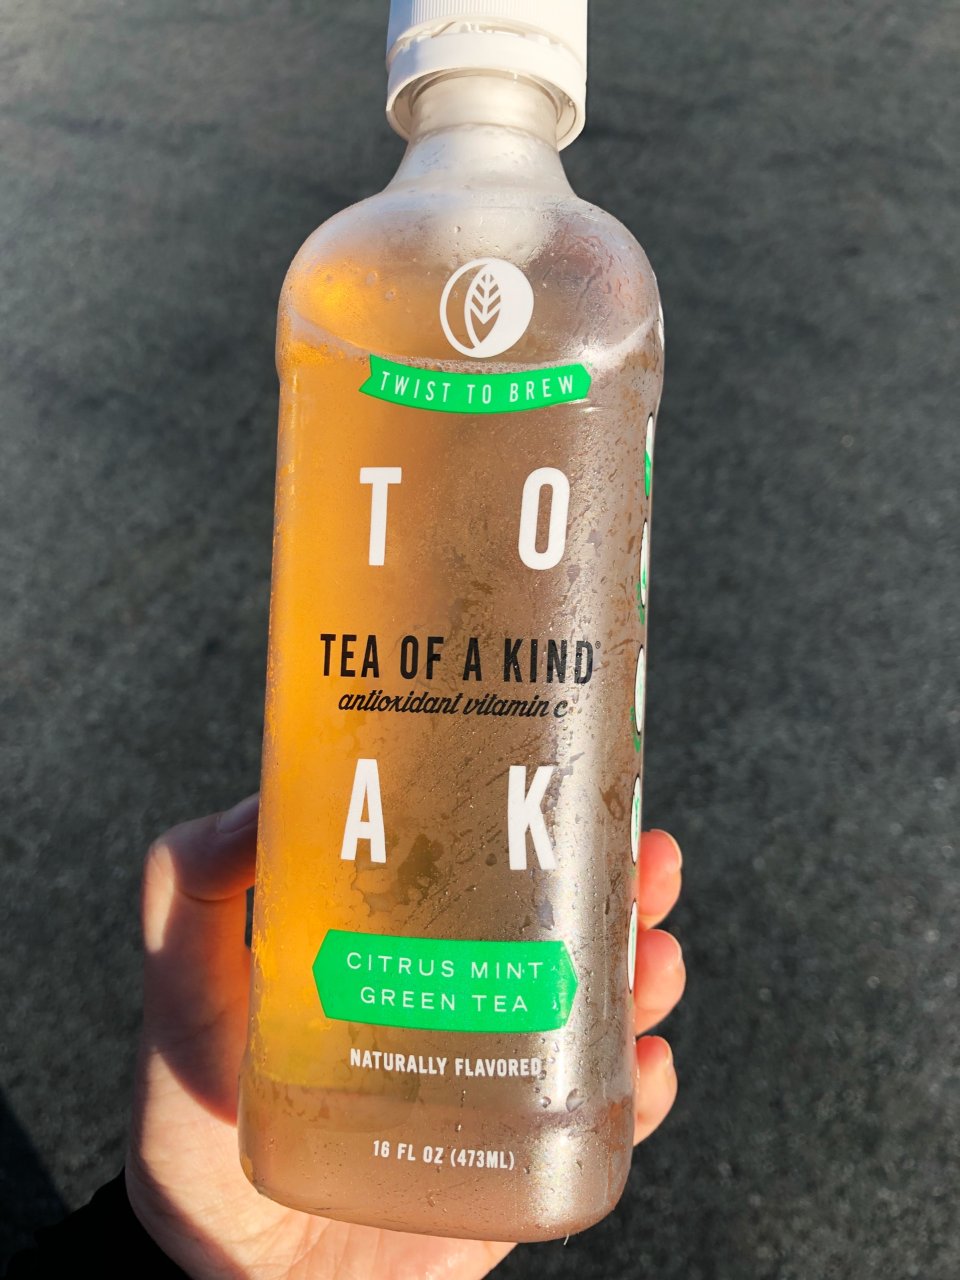 Tea of a Kind Variety Pack (12 count) - Iced Tea and Yerba Mate. Zero Sugar Alternative to Energy drinks, Coffee, and Flavored Water. High in Antioxidants and Vitamin C. 16oz bottles : Grocery & Gourmet Food